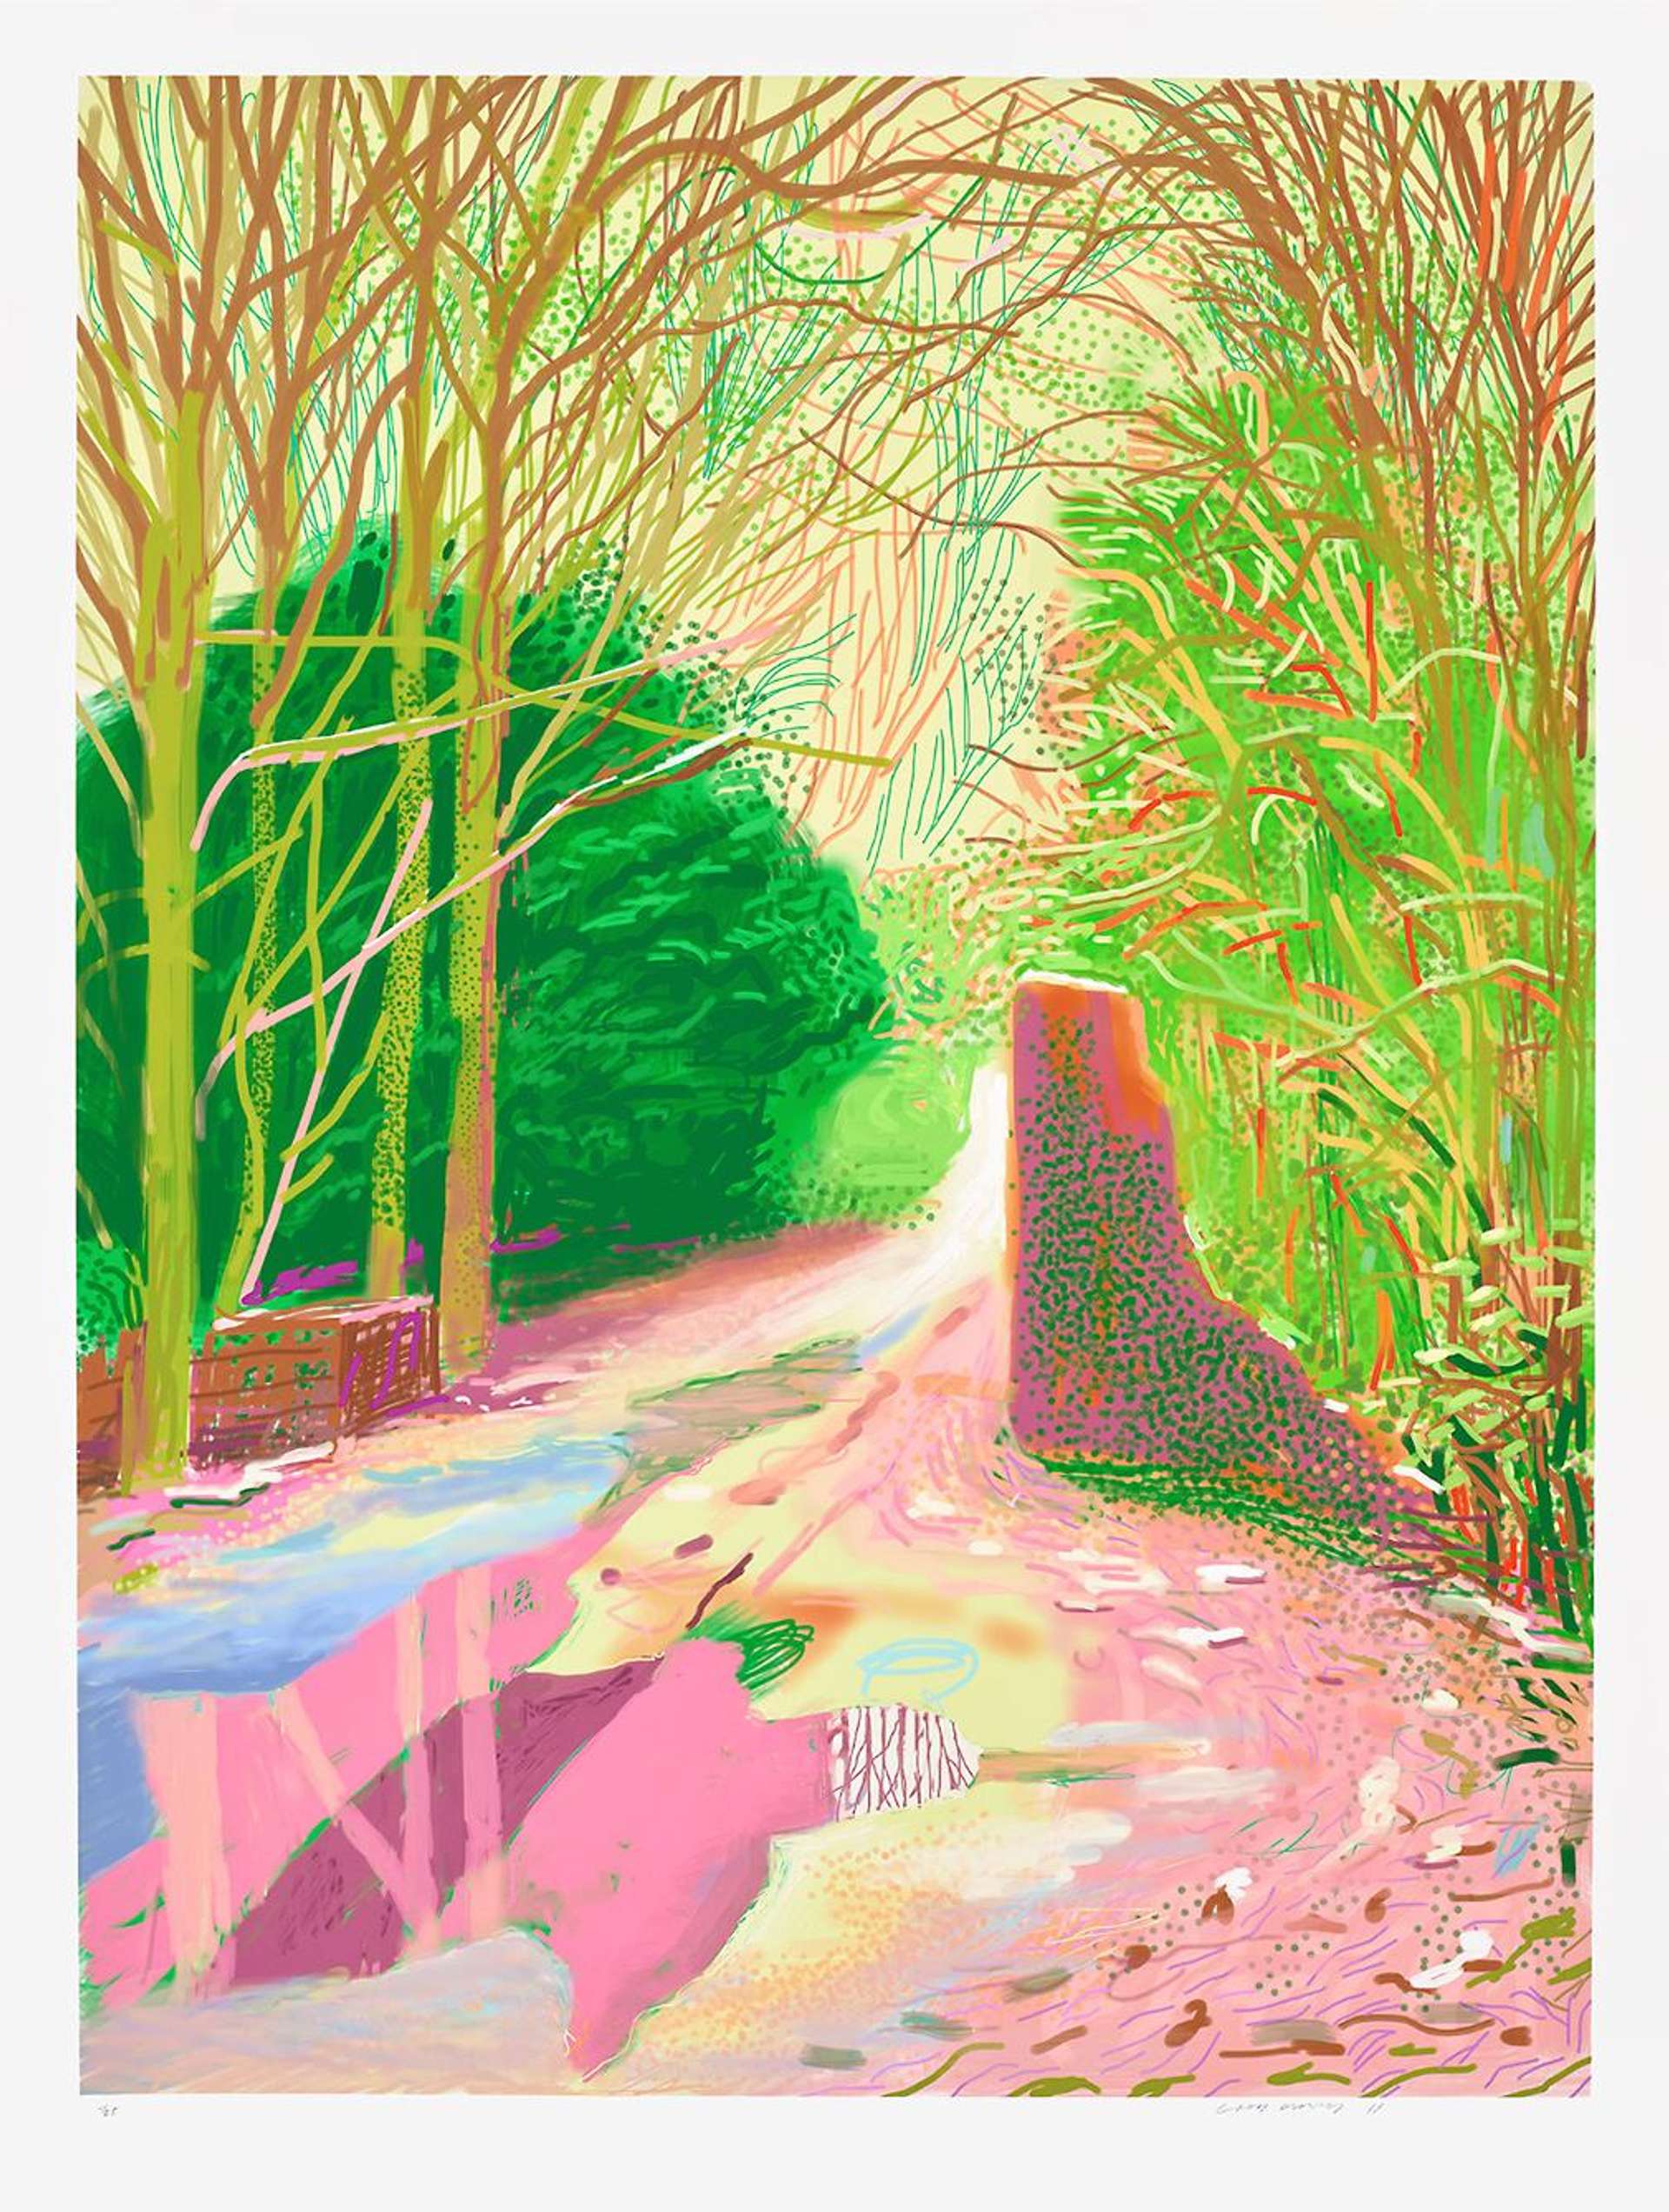 The Arrival Of Spring In Woldgate, East Yorkshire 2nd January 2011 - Signed Print by David Hockney 2011 - MyArtBroker